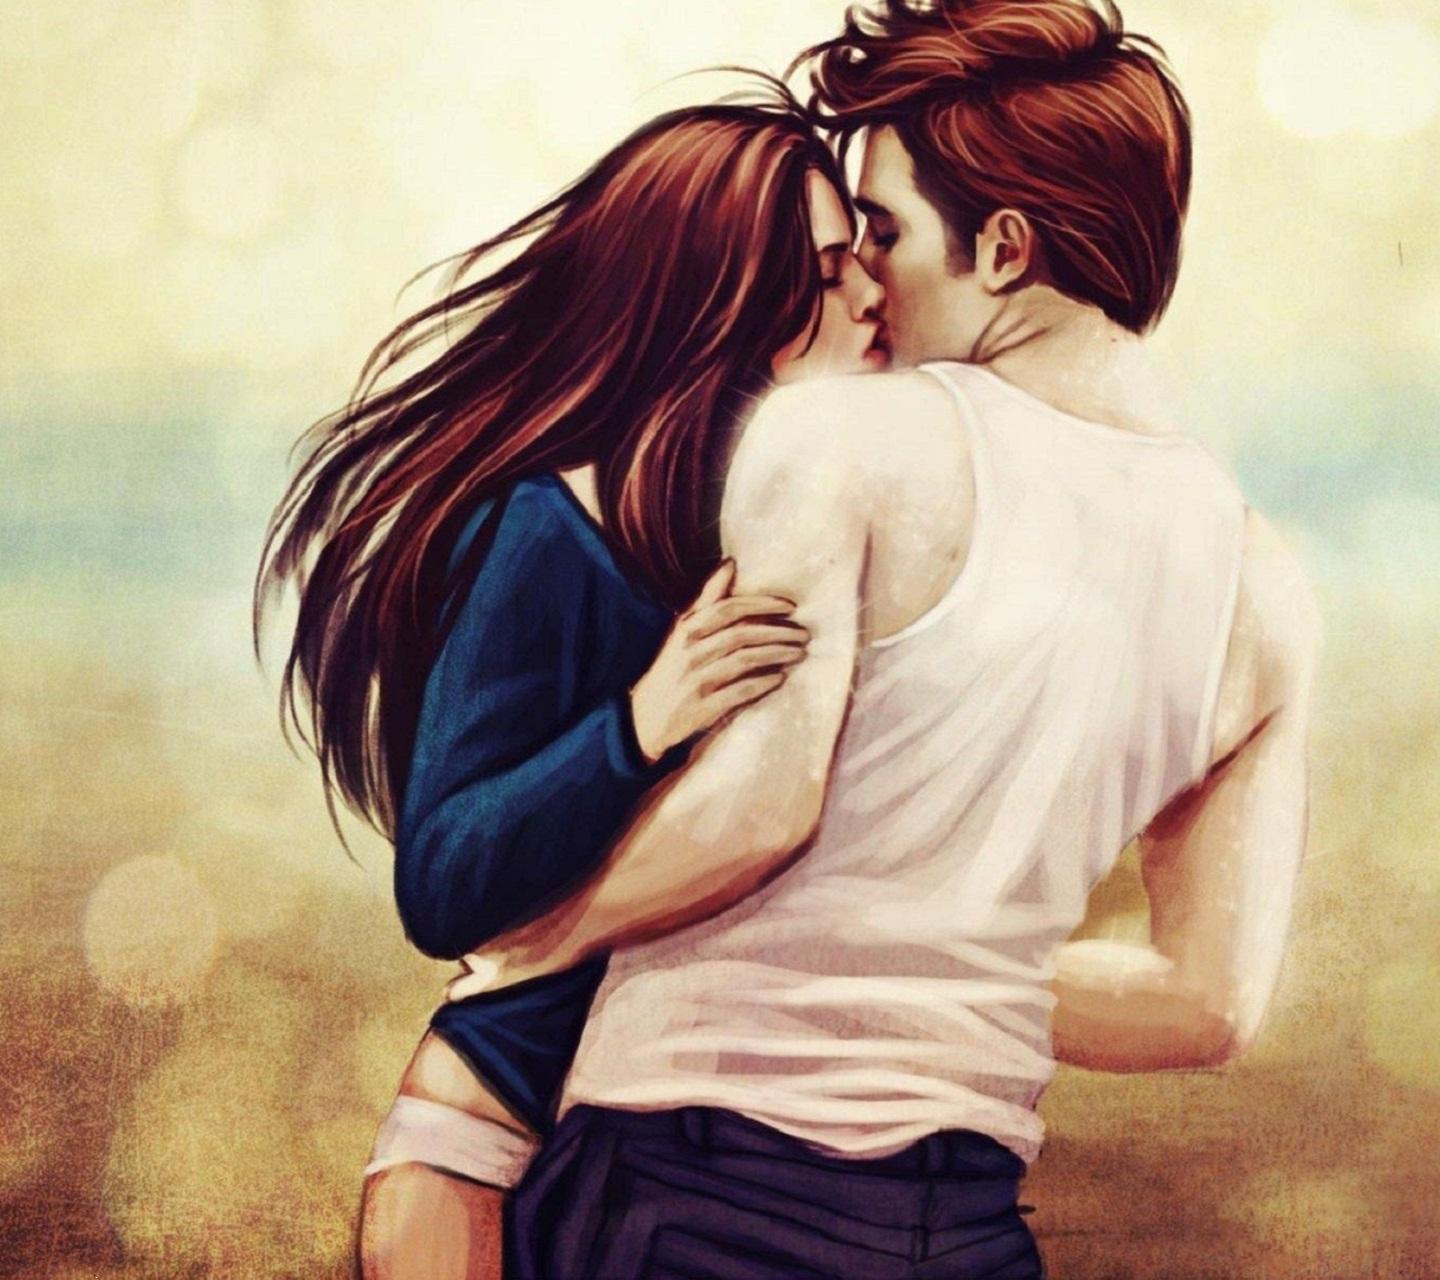 Download Edward and bella - Romantic couple wallpapers for your mobile cell  phone